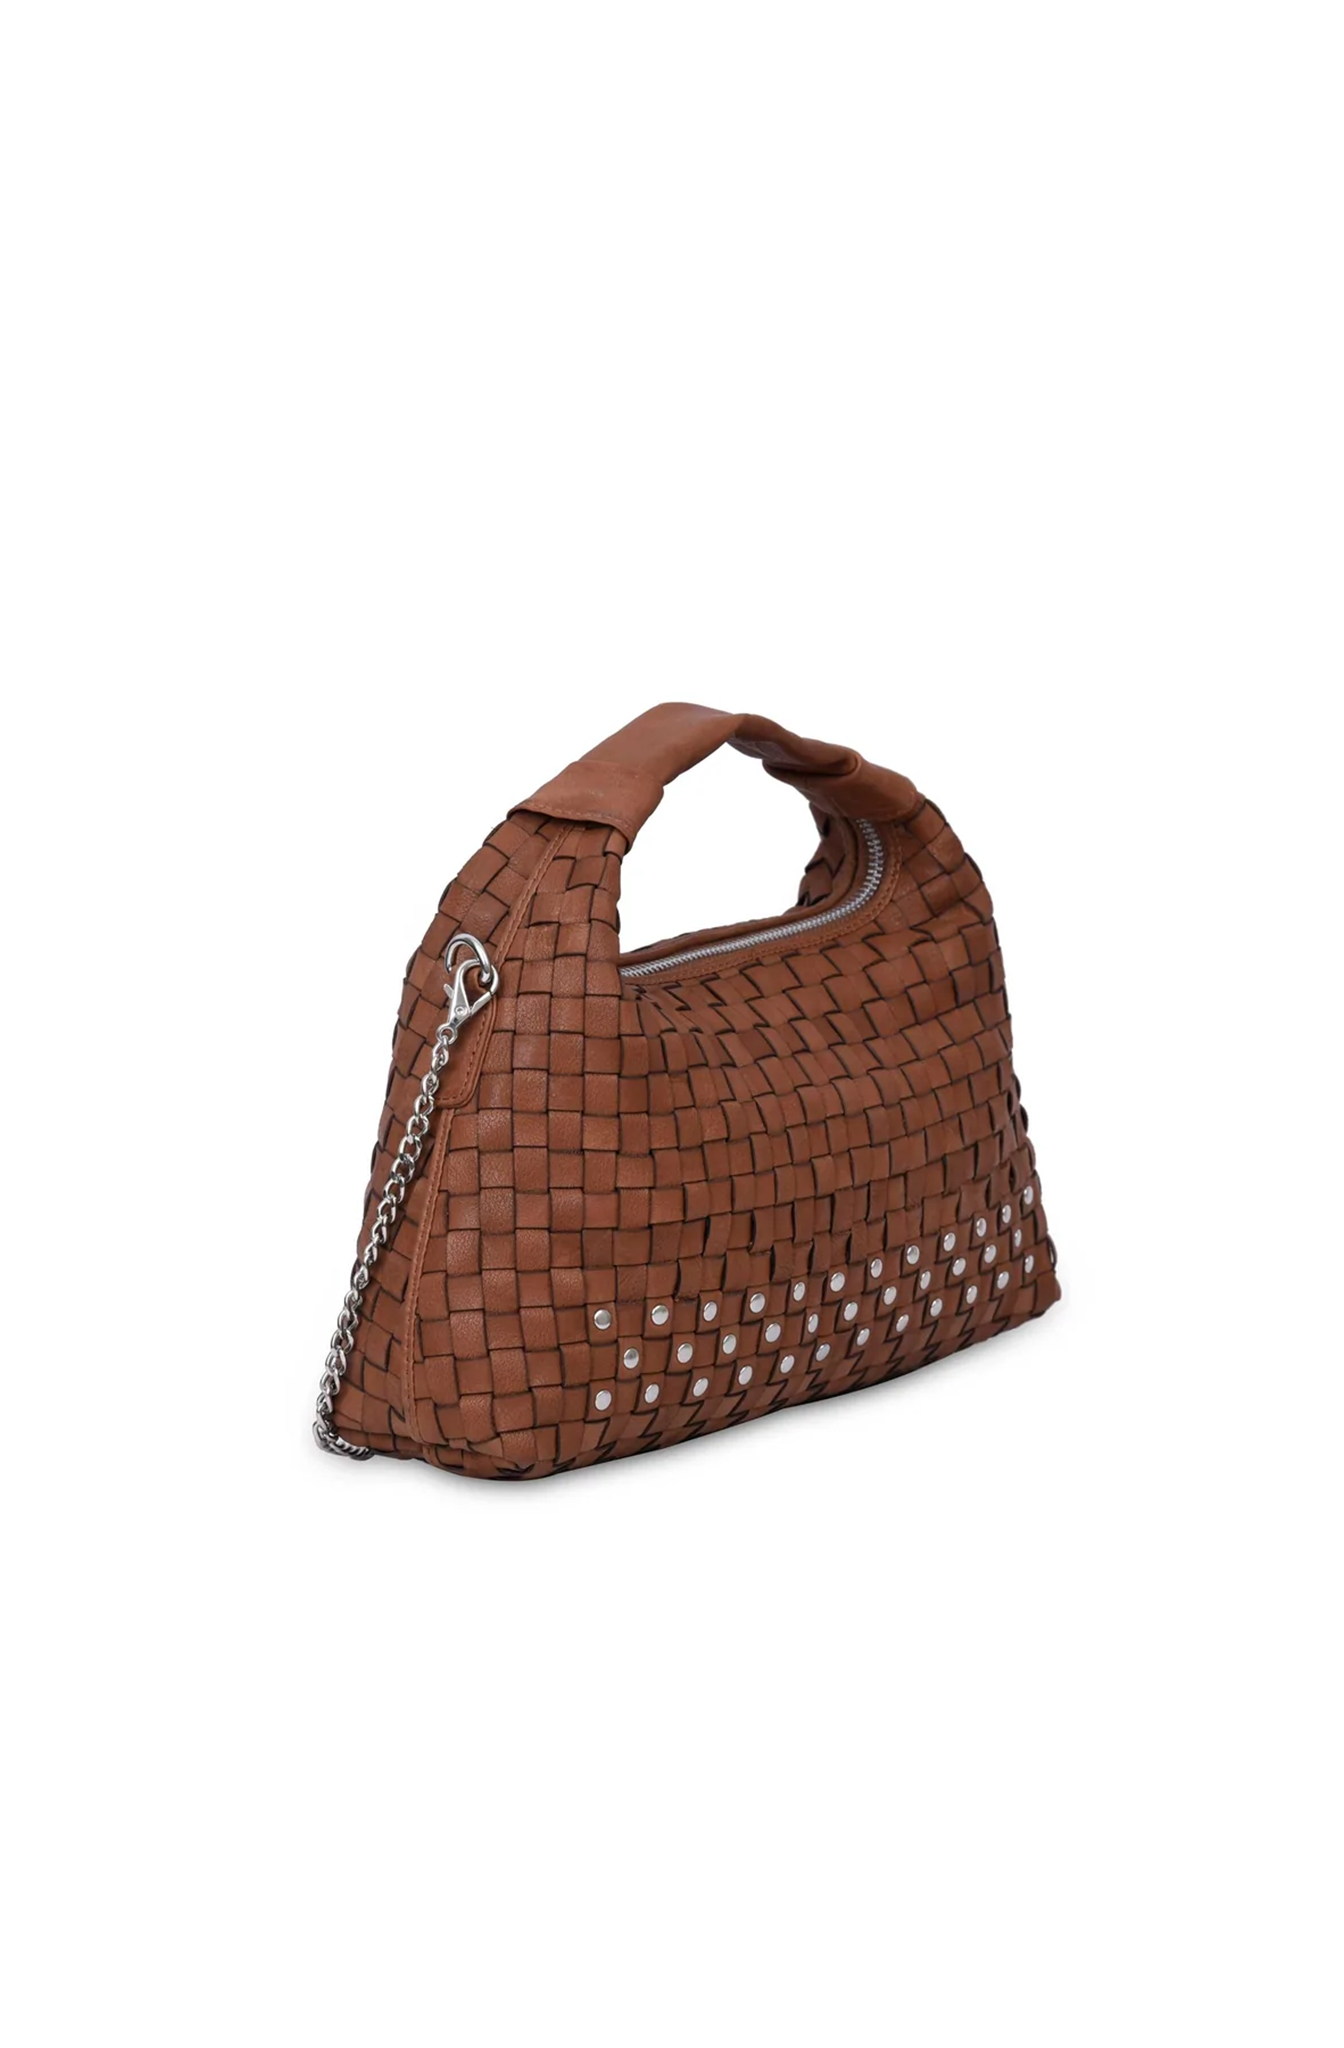 This Nunoo maxi dandy brown bag has one main compartment with a zip closure, as well as an inner pocket with a zip closure. A chain is included with the bag.